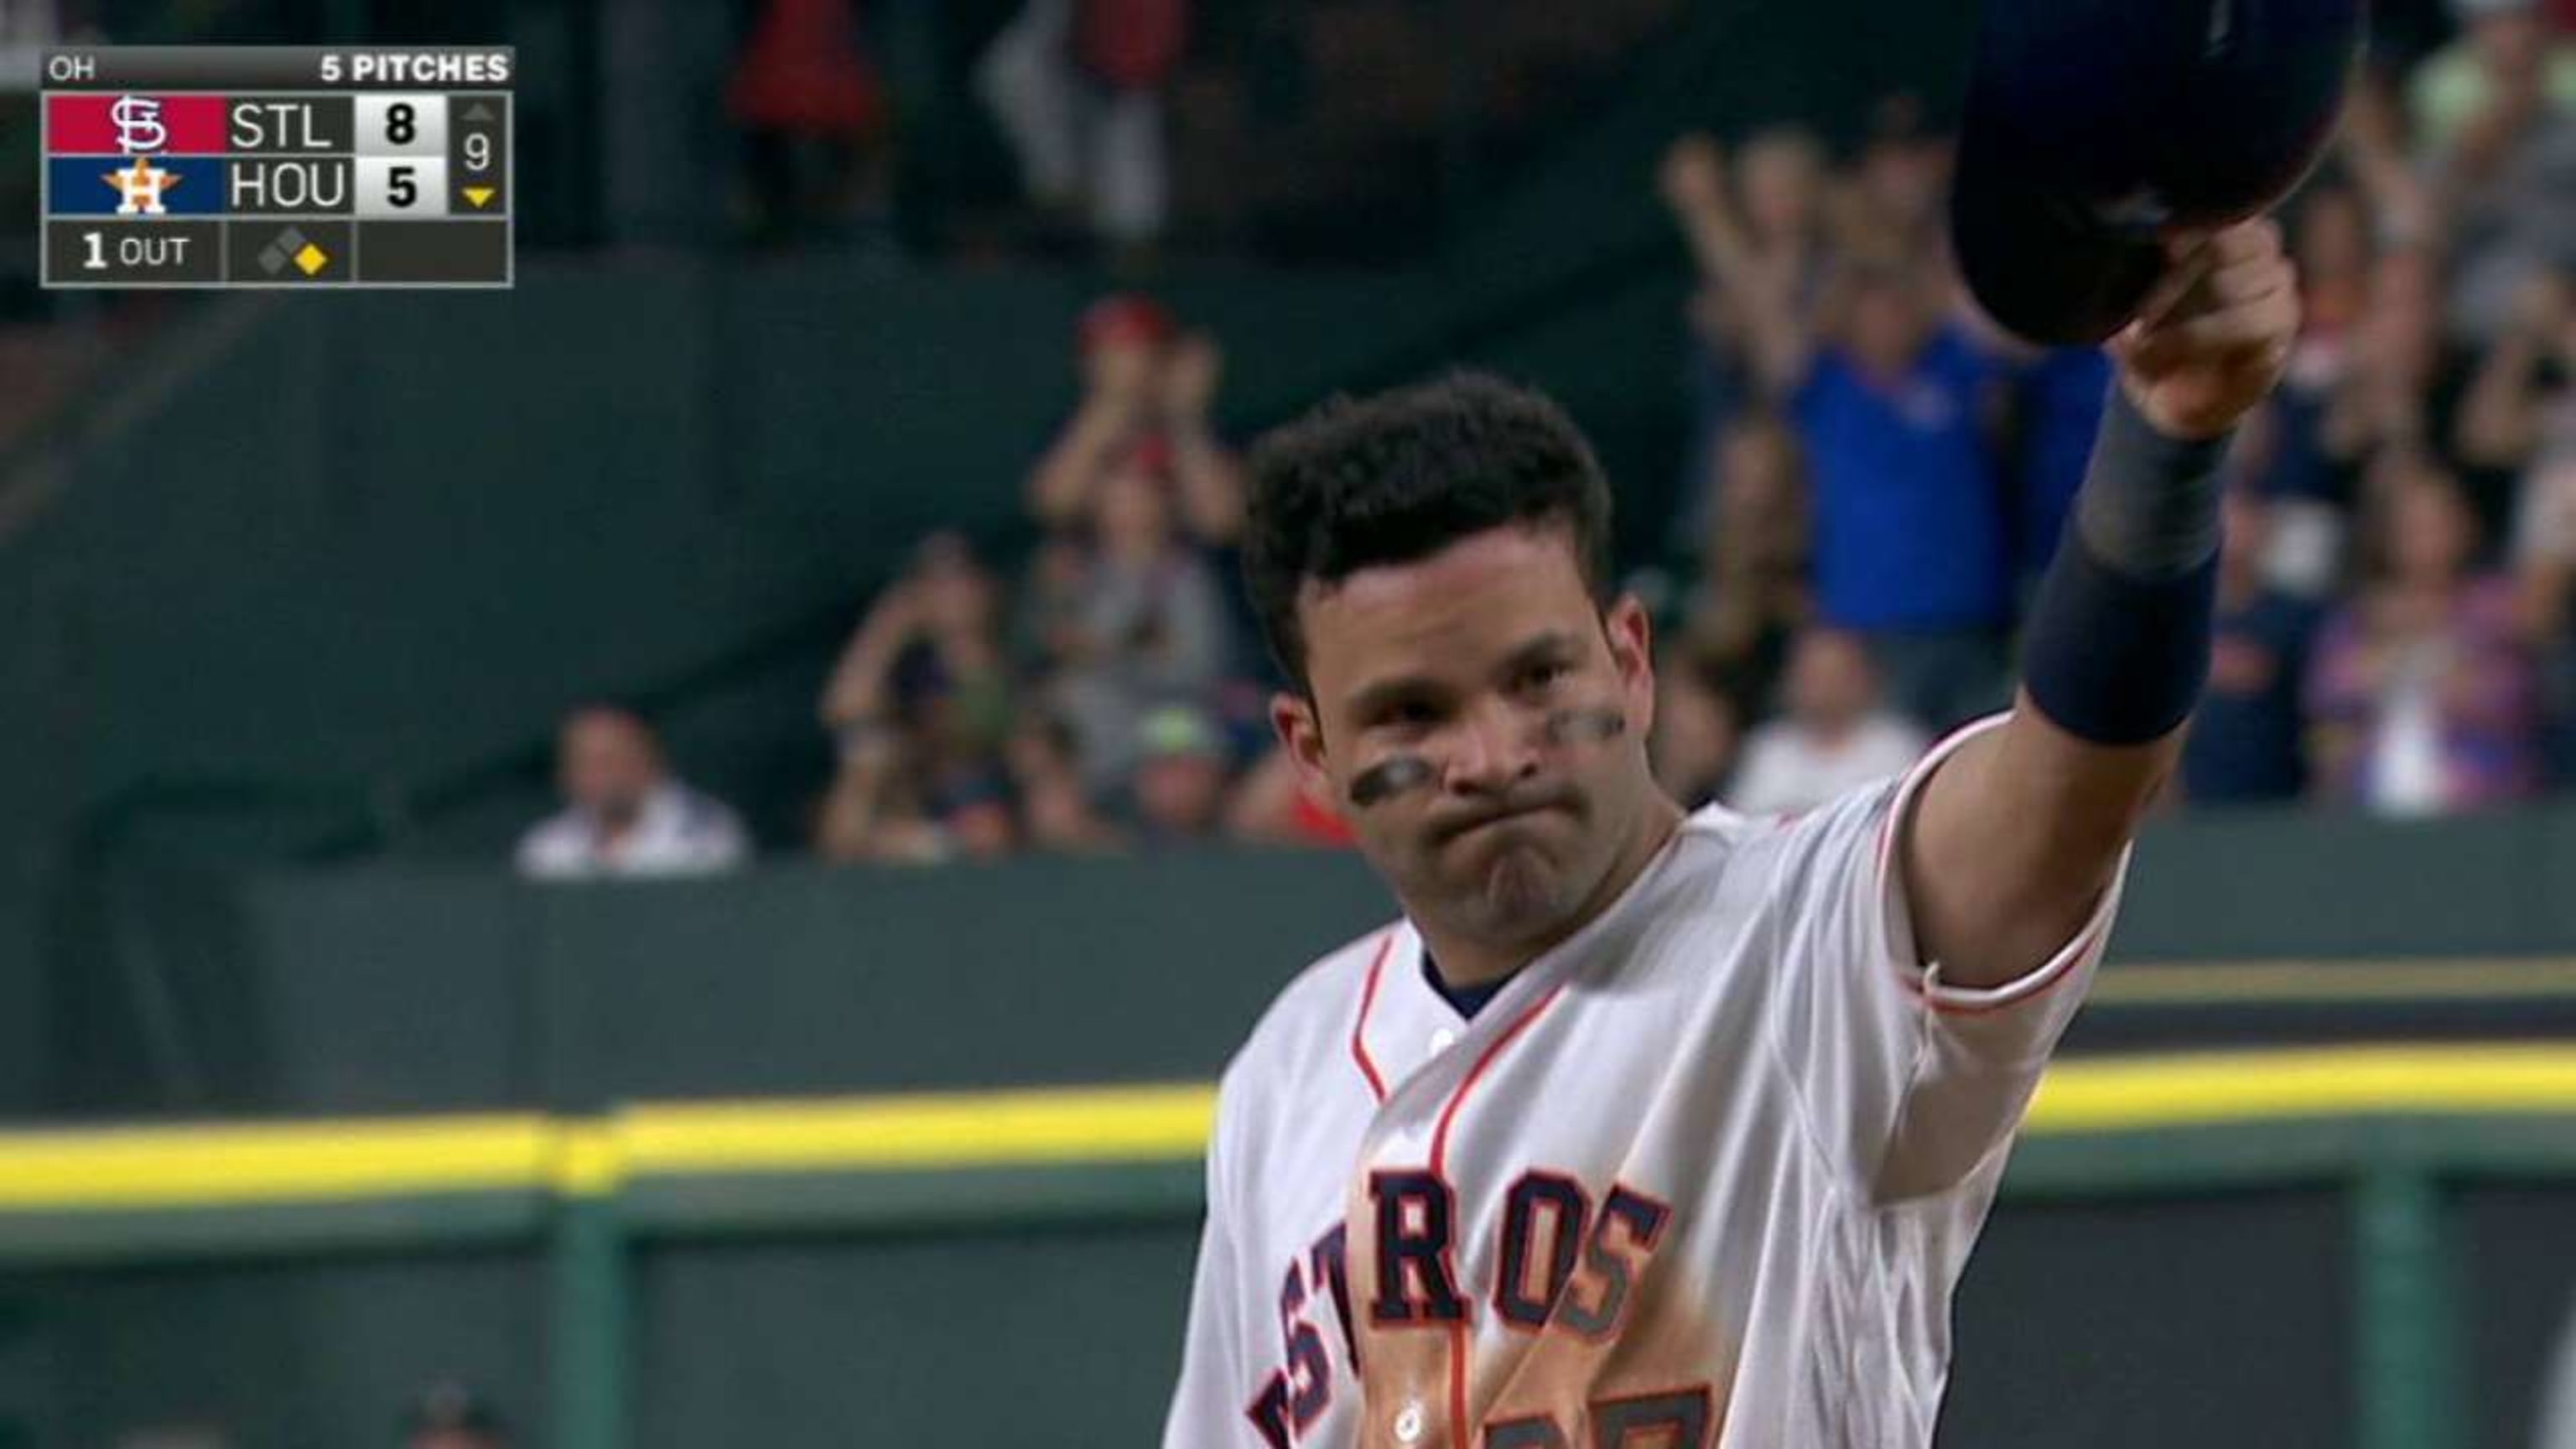 Astros' 5-foot-5 hitting machine Jose Altuve goes 4-for-5, now batting .377  at age 21 - NBC Sports